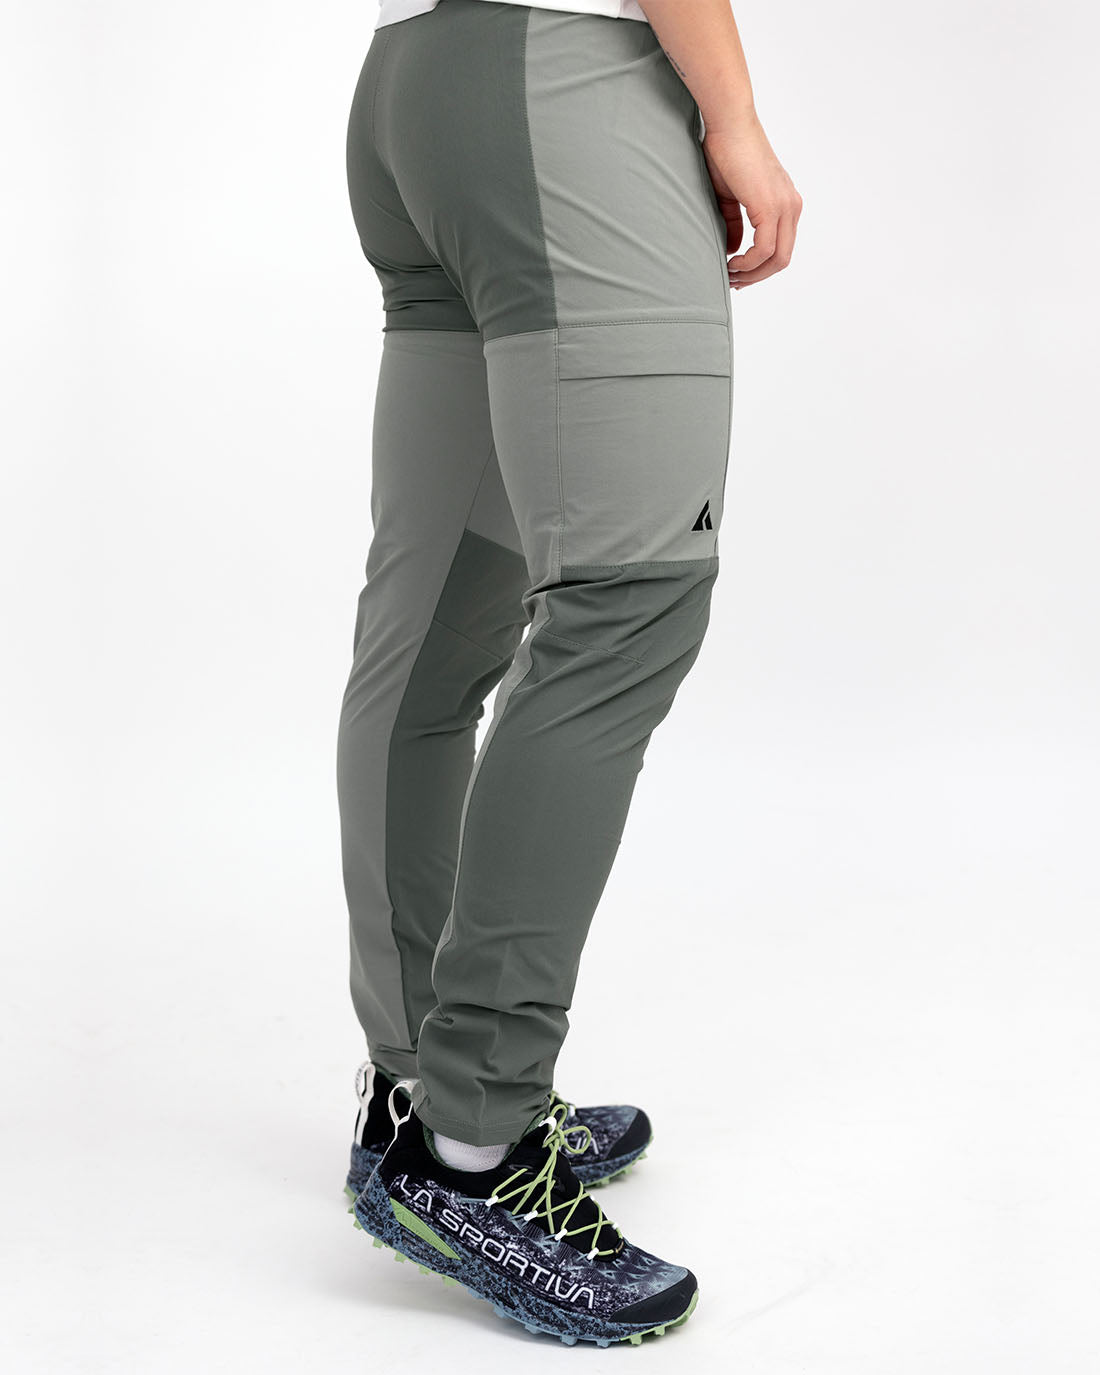 heybb Women's Cargo Pants  Outdoor Athletic Pants - with 6